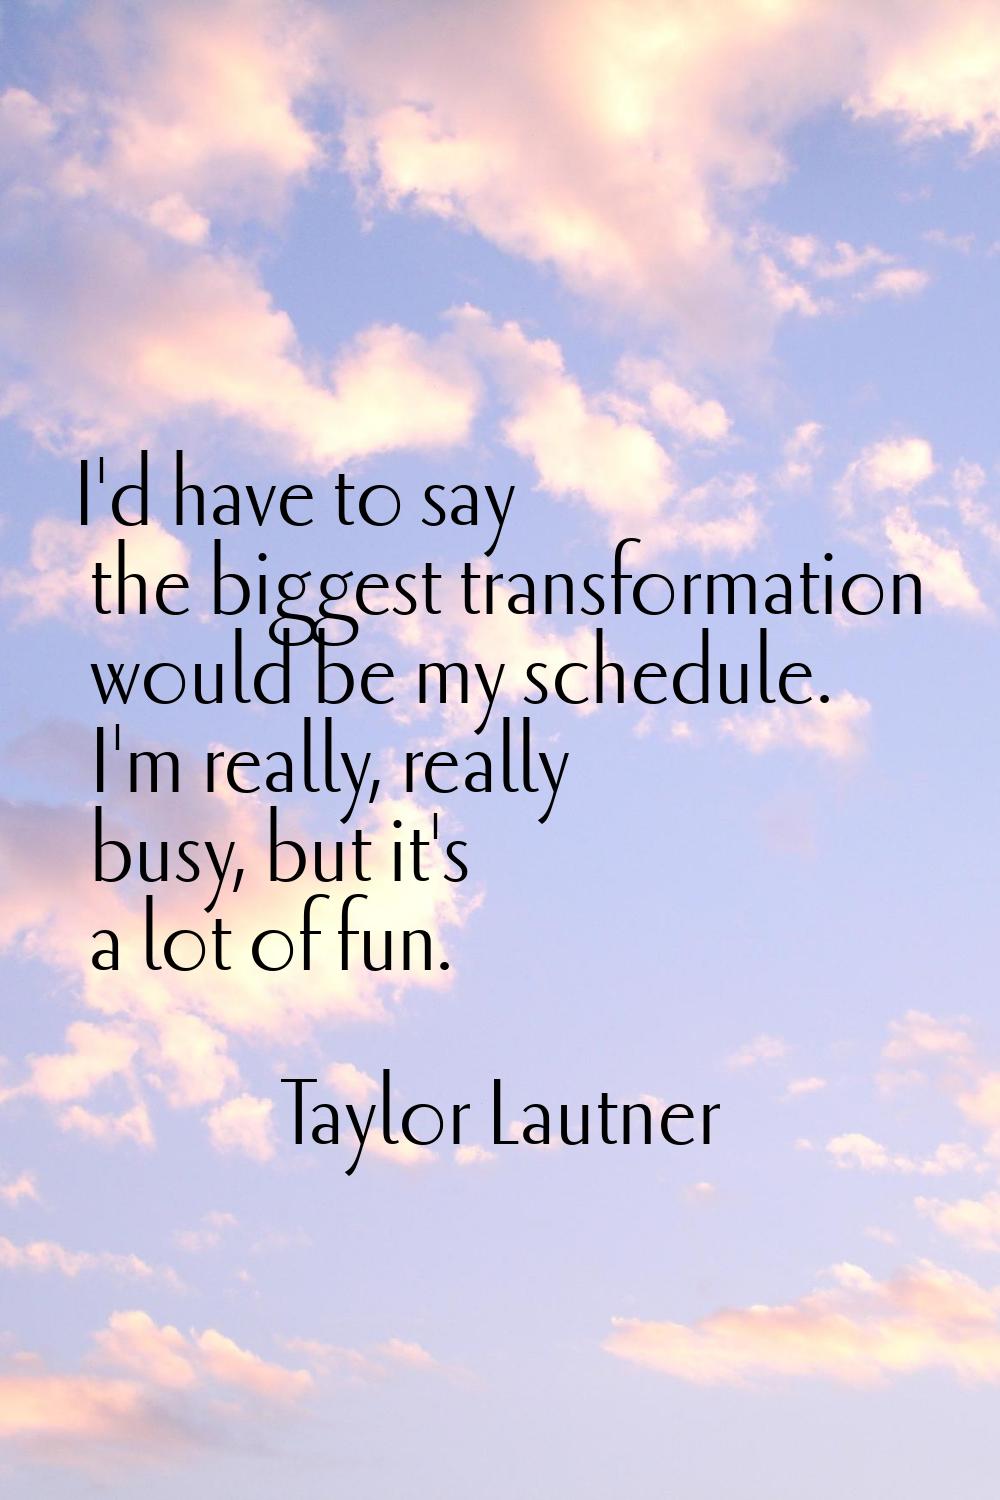 I'd have to say the biggest transformation would be my schedule. I'm really, really busy, but it's 